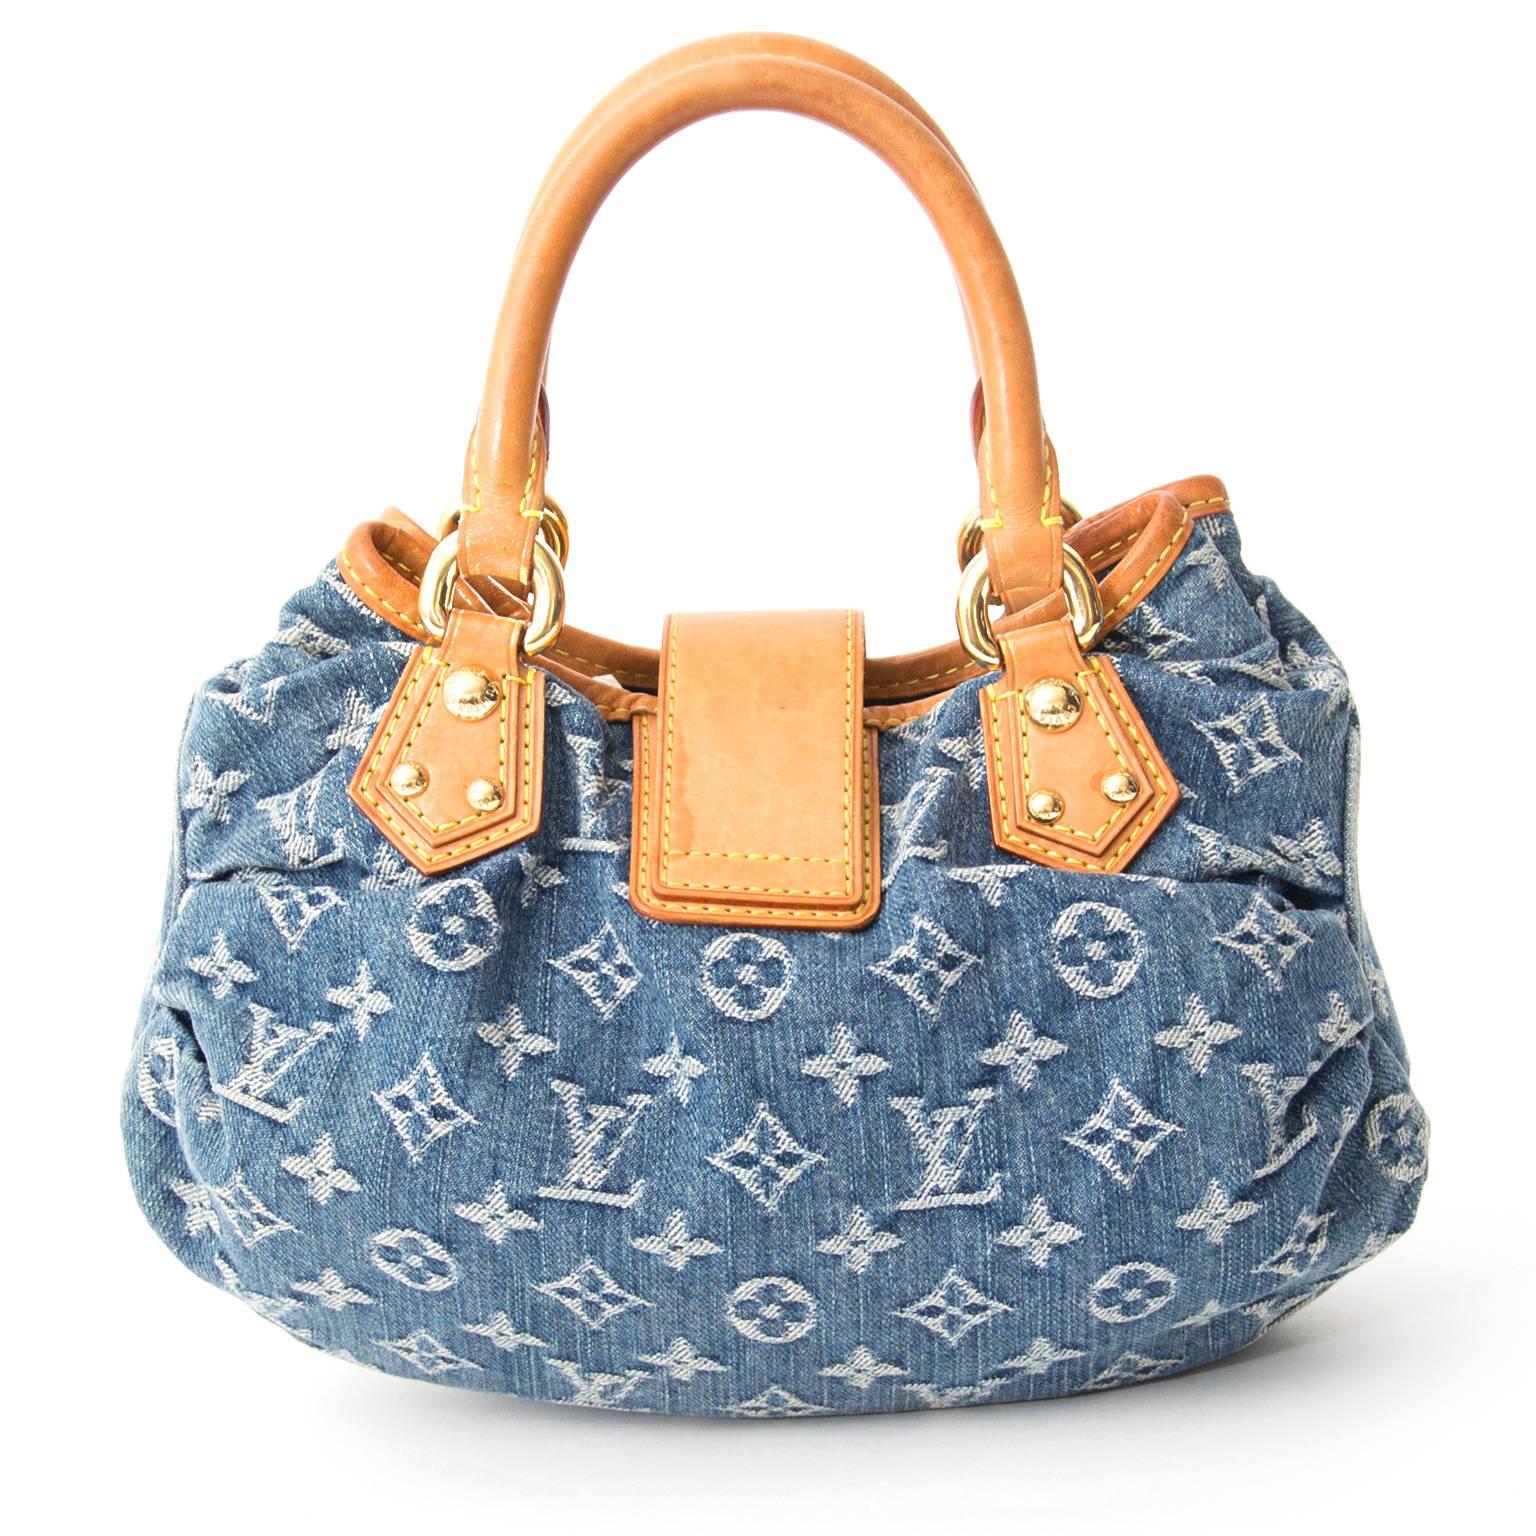 Louis Vuitton Mini Denim Monogram Bag.

Bag with a golden buckle and yellow suede lining.

Go for a casual denim look with this cute little bag.
